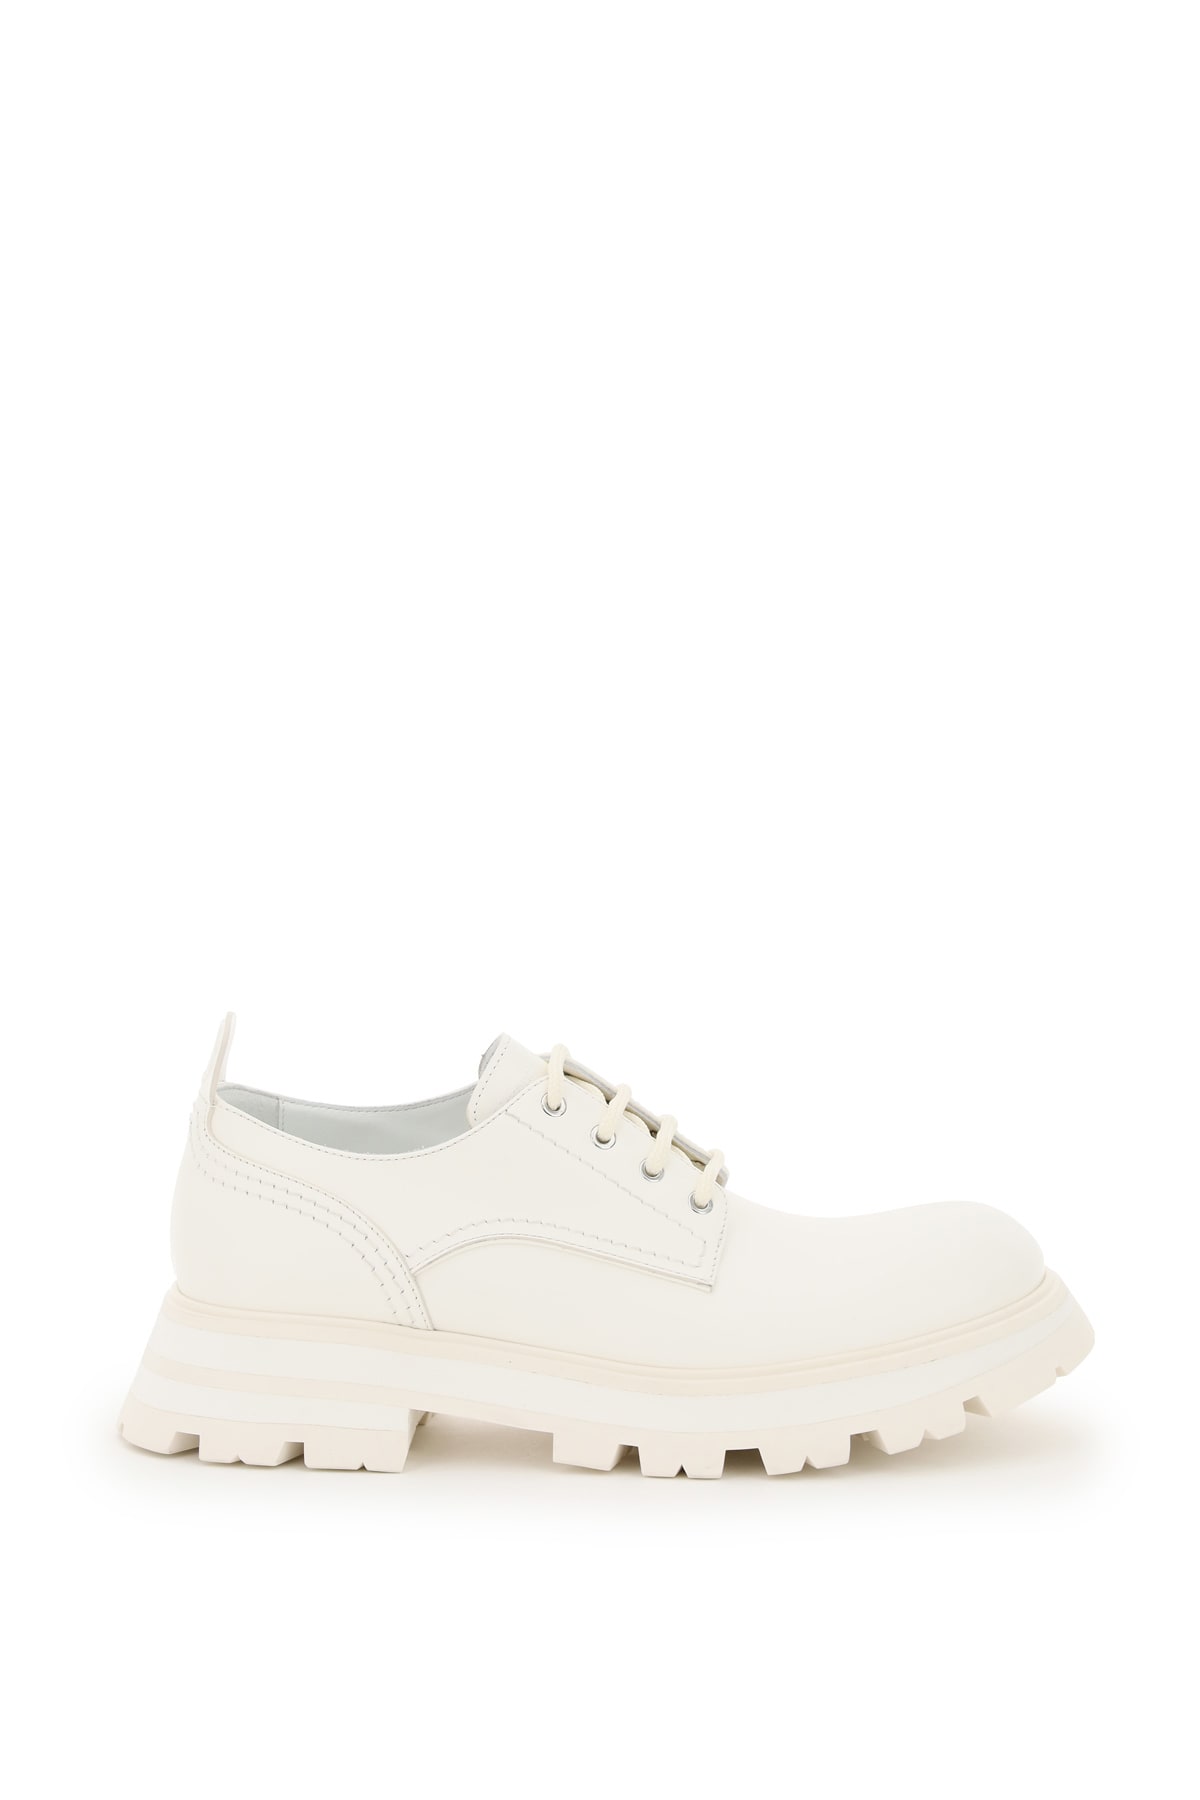 ALEXANDER MCQUEEN WANDER LEATHER LACE-UP SHOES,11892244